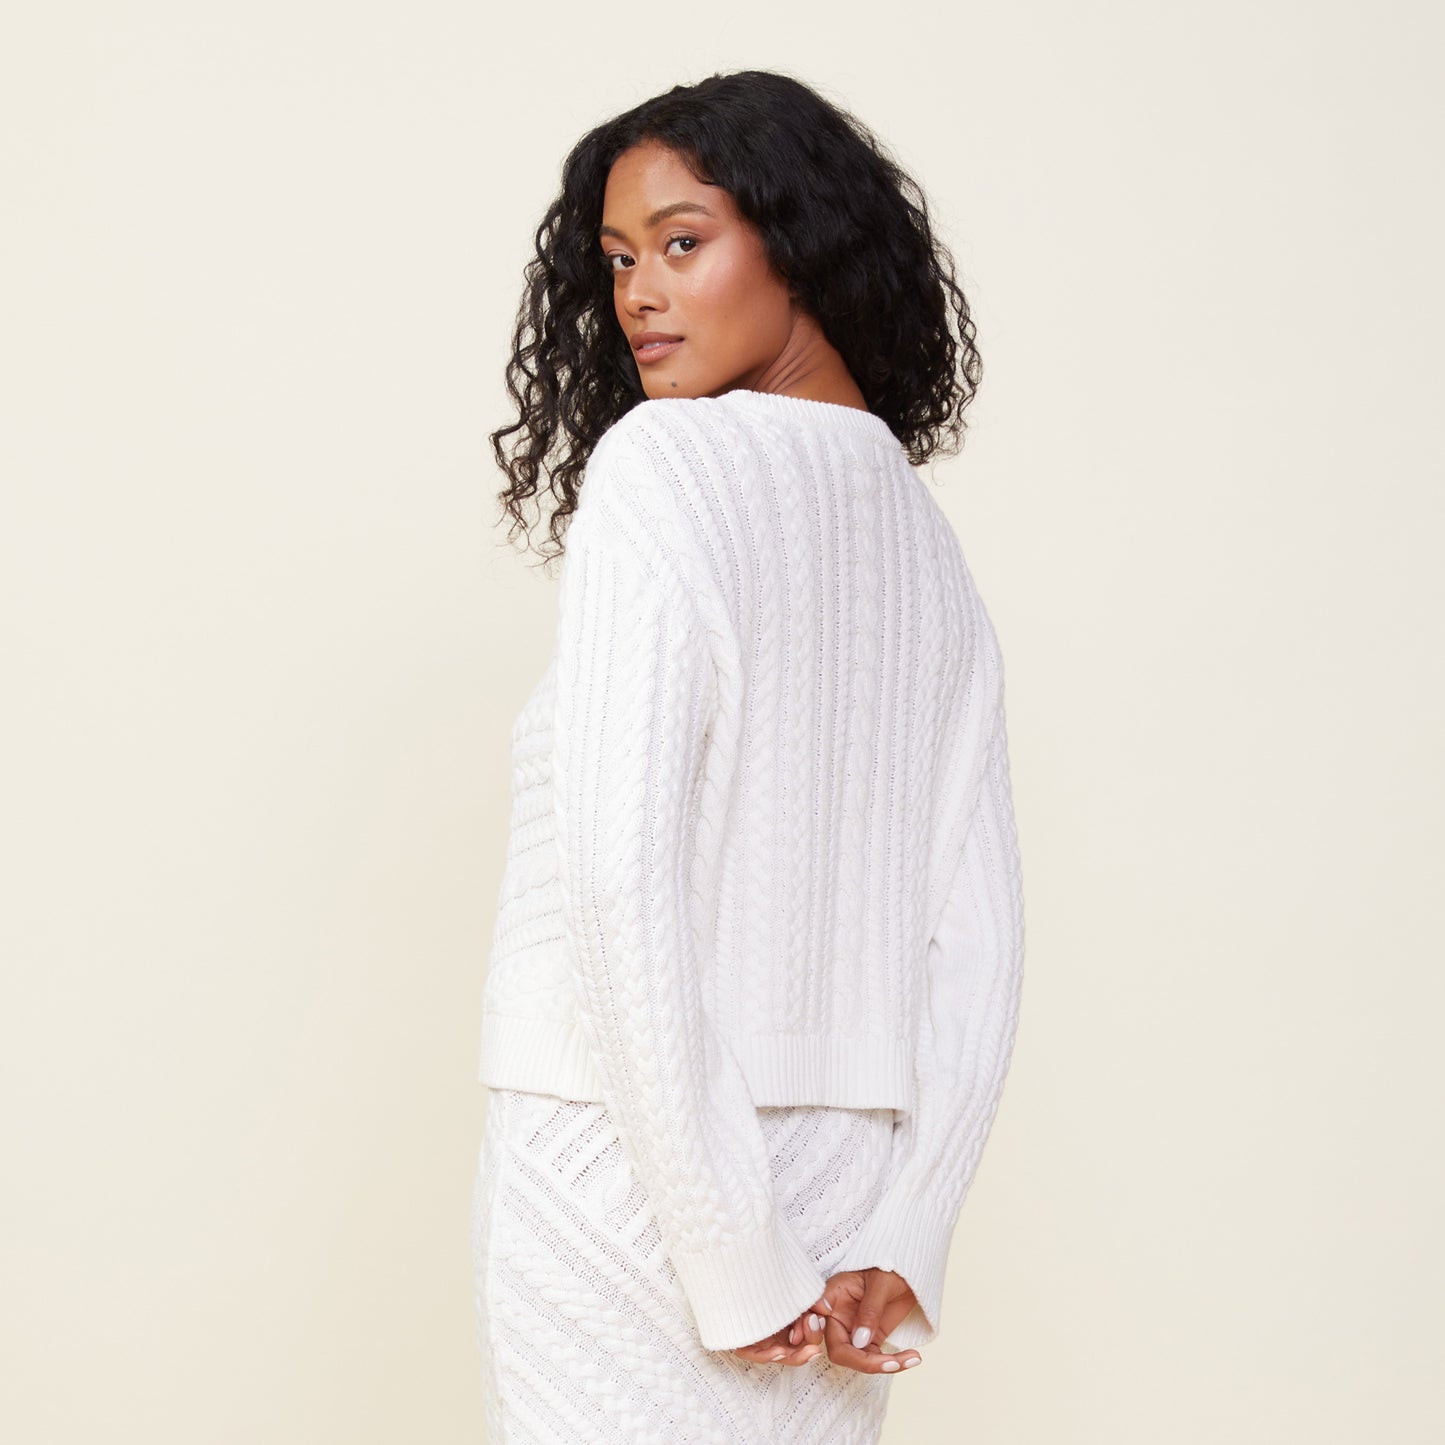 Merino Wool Cable Knit Sweater